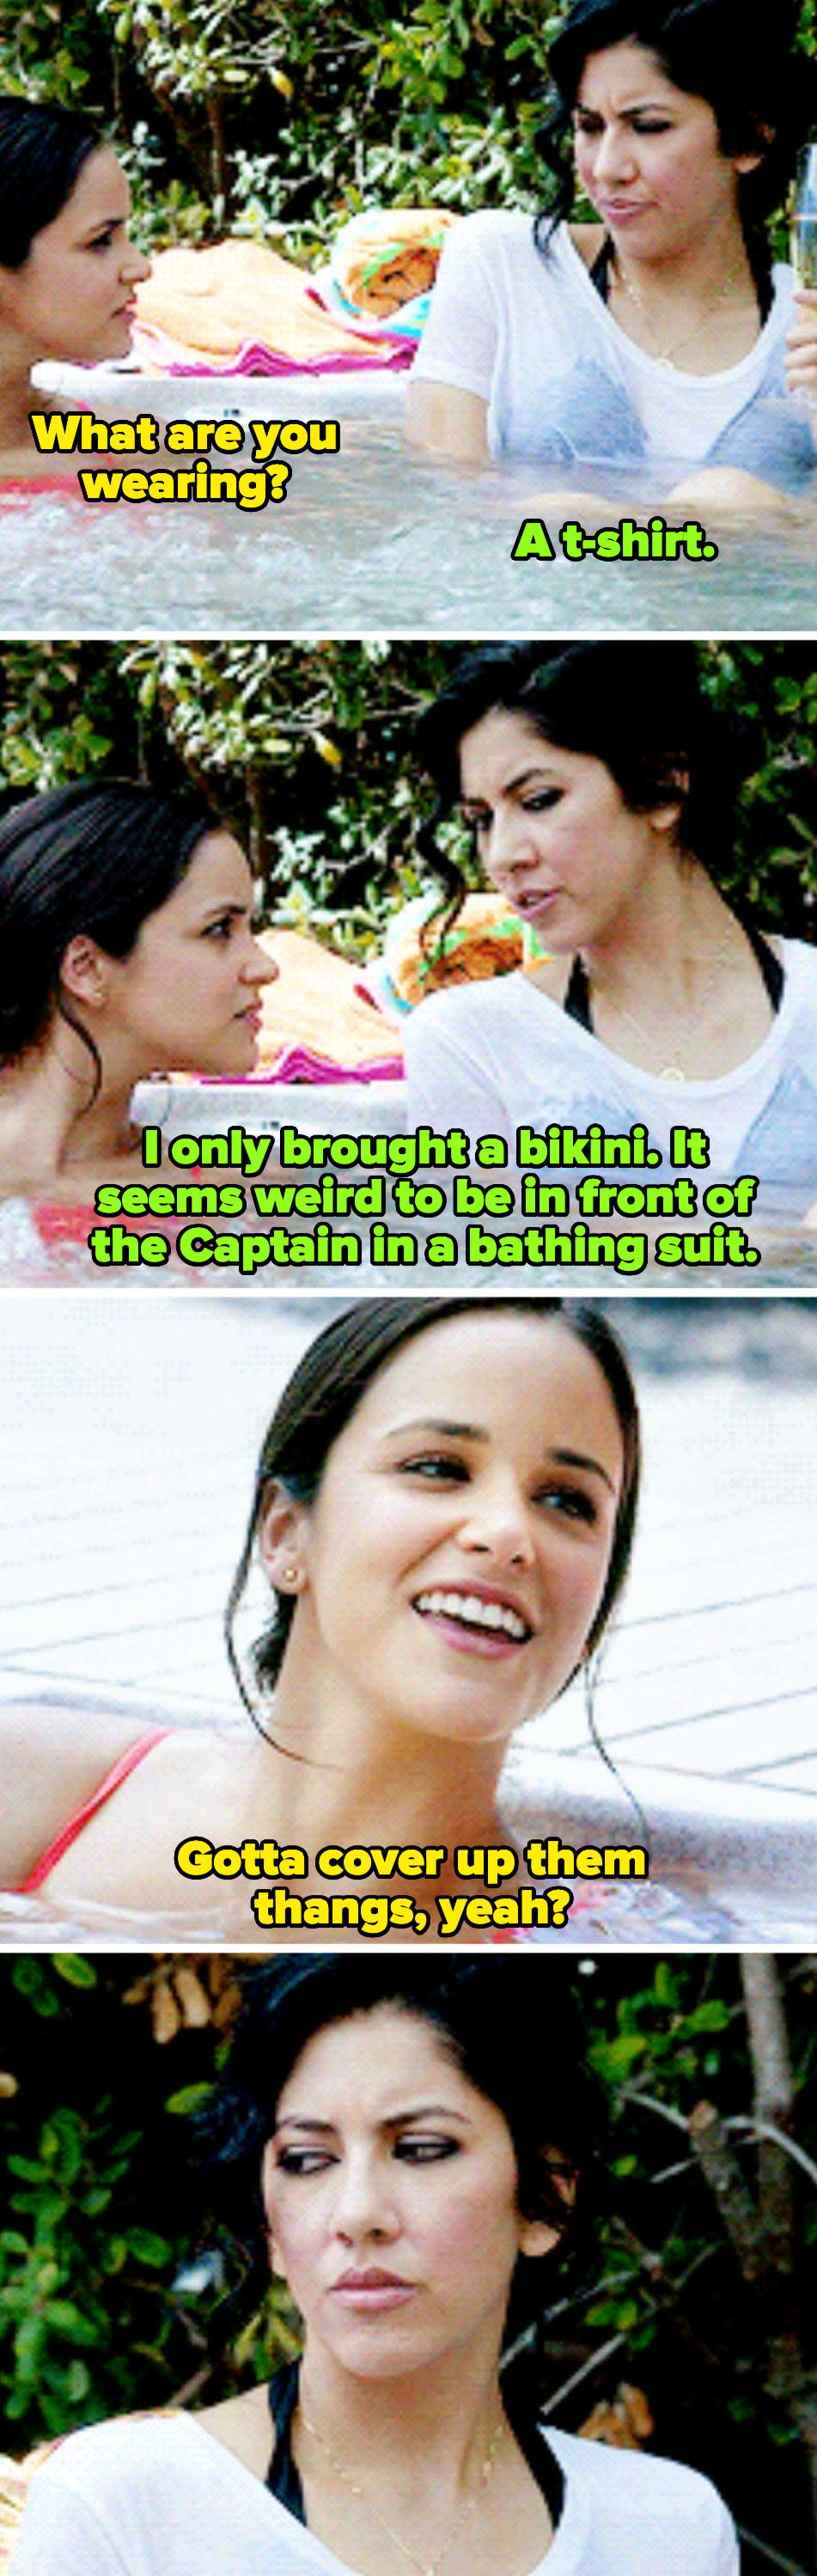 Rosa to Amy: "I only brought a bikini. It seems weird to be in front of the captain wearing a bathing suit." Drunk Amy to Rosa: "Gotta cover up them thangs, yeah?"